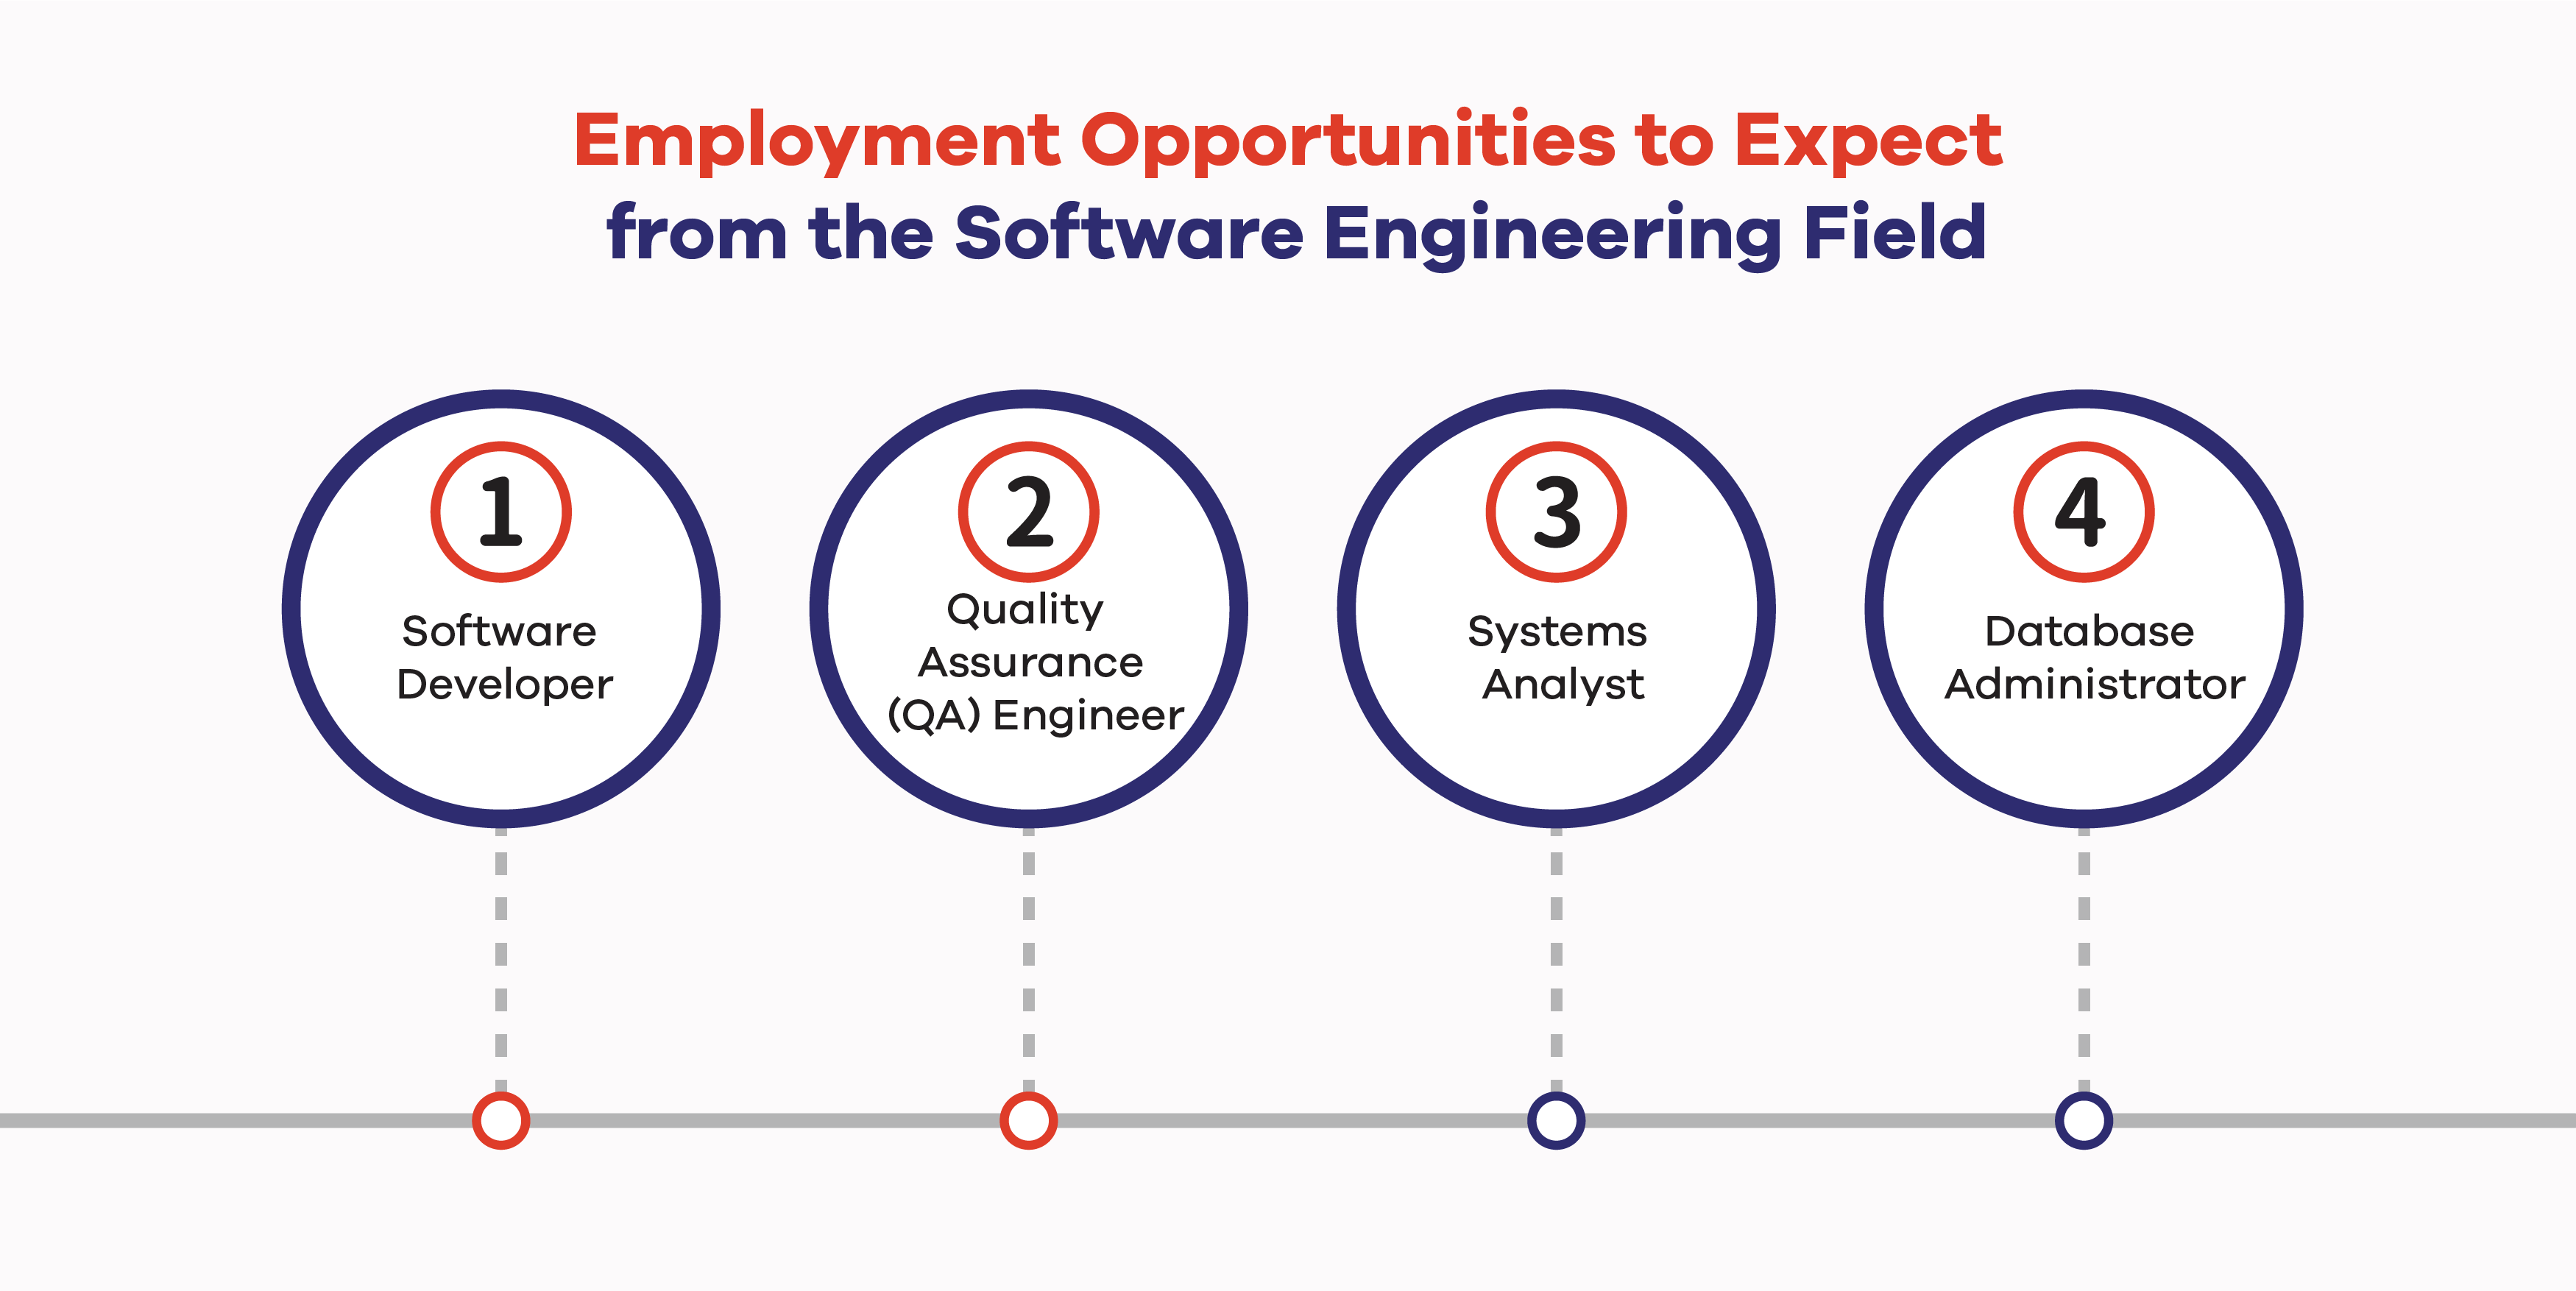 Employment Opportunities to Expect from the Software Engineering Field